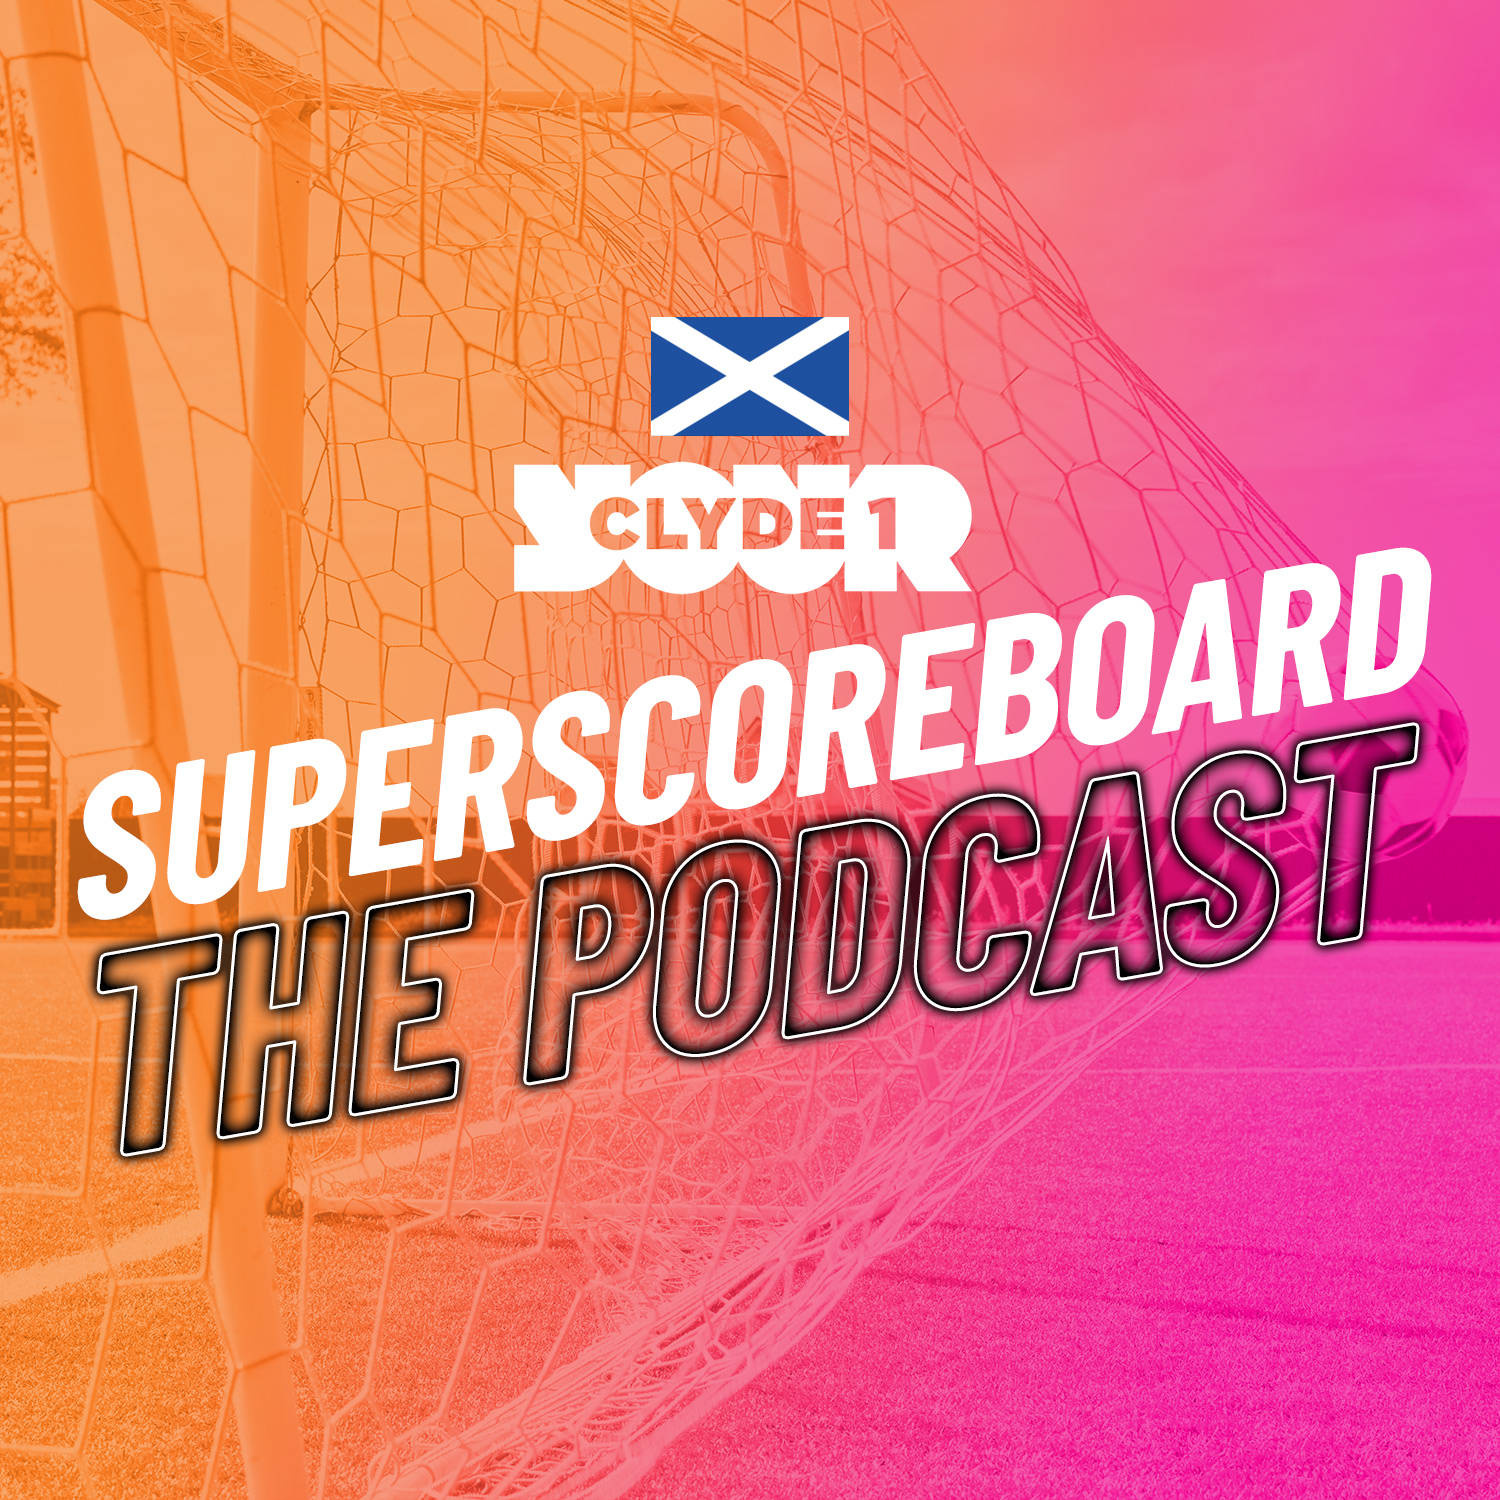 Wednesday 6th March Clyde 1 Superscoreboard